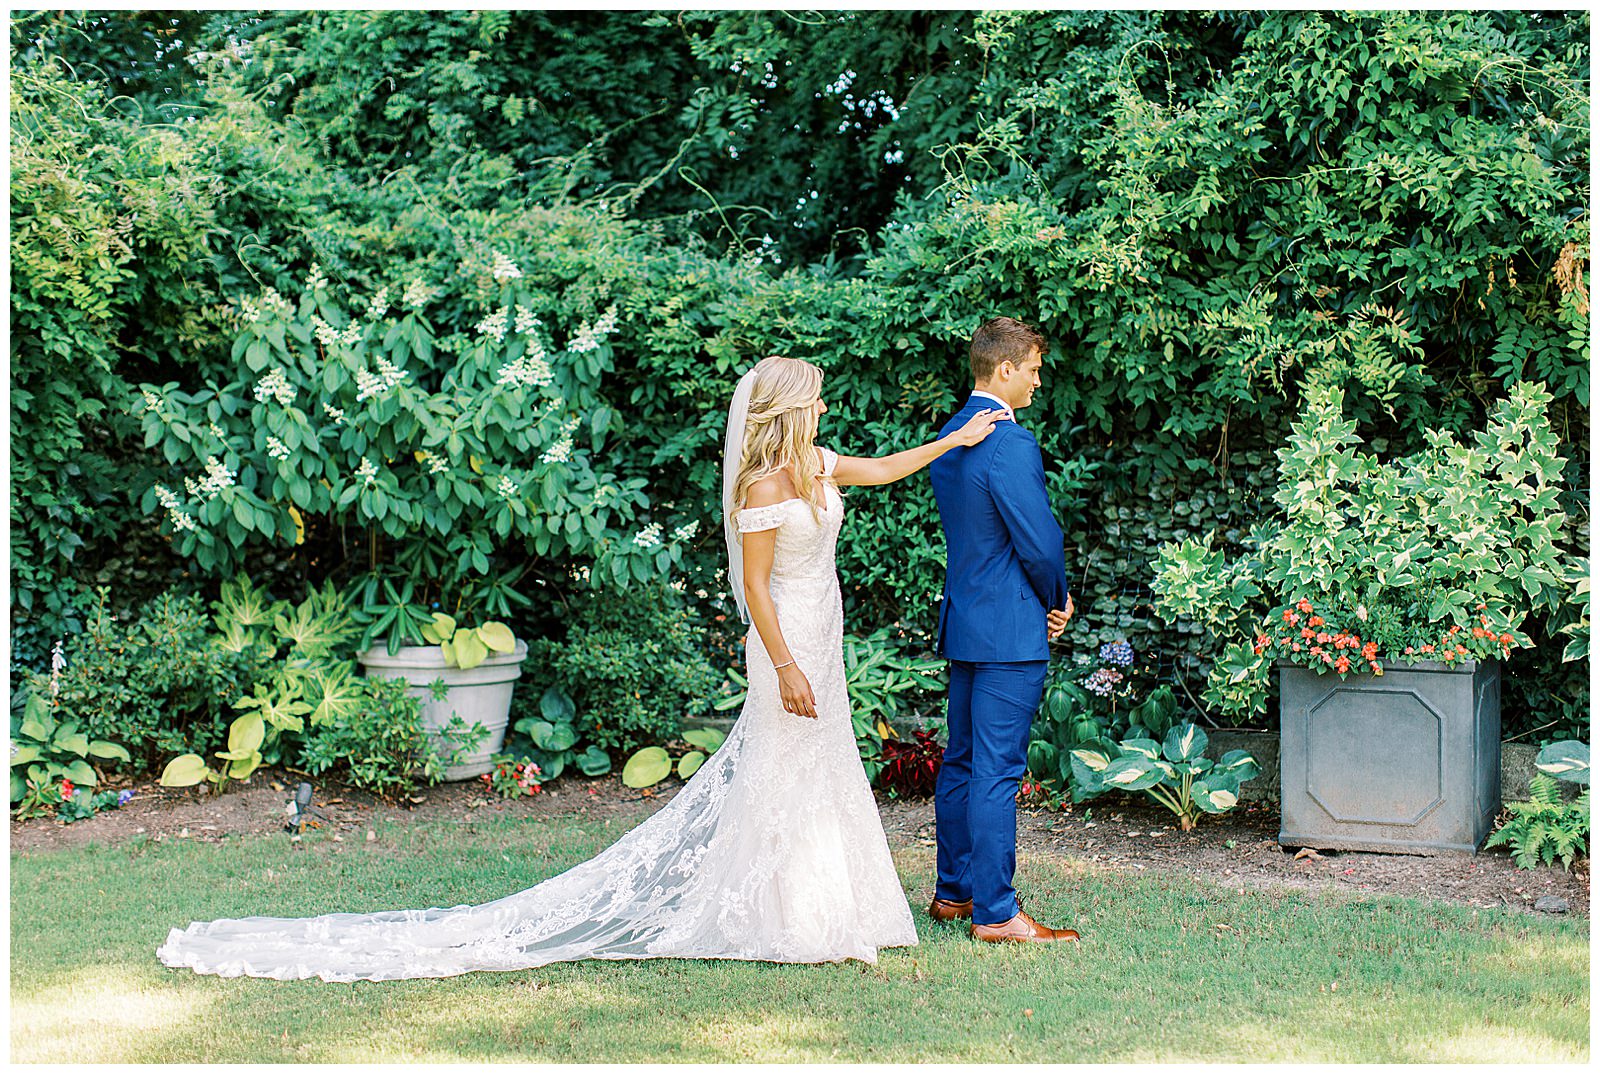 royal blue suited groom and blonde haired bride emotional first look outdoor in garden